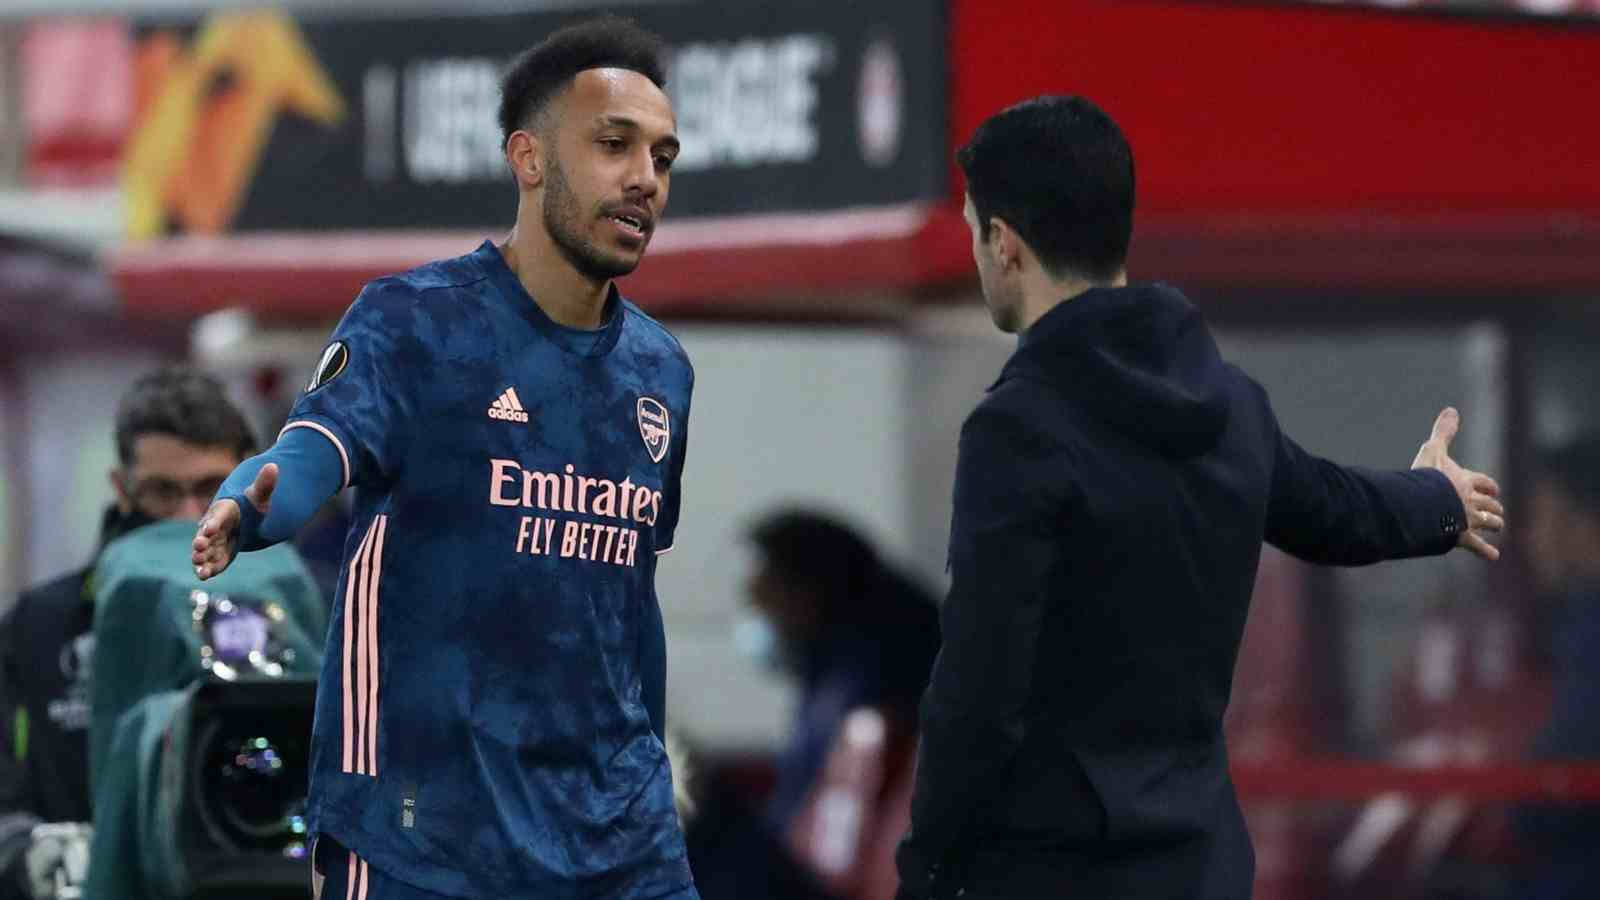 Pierre-Emerick Aubameyang Appearing With Manager Wallpaper